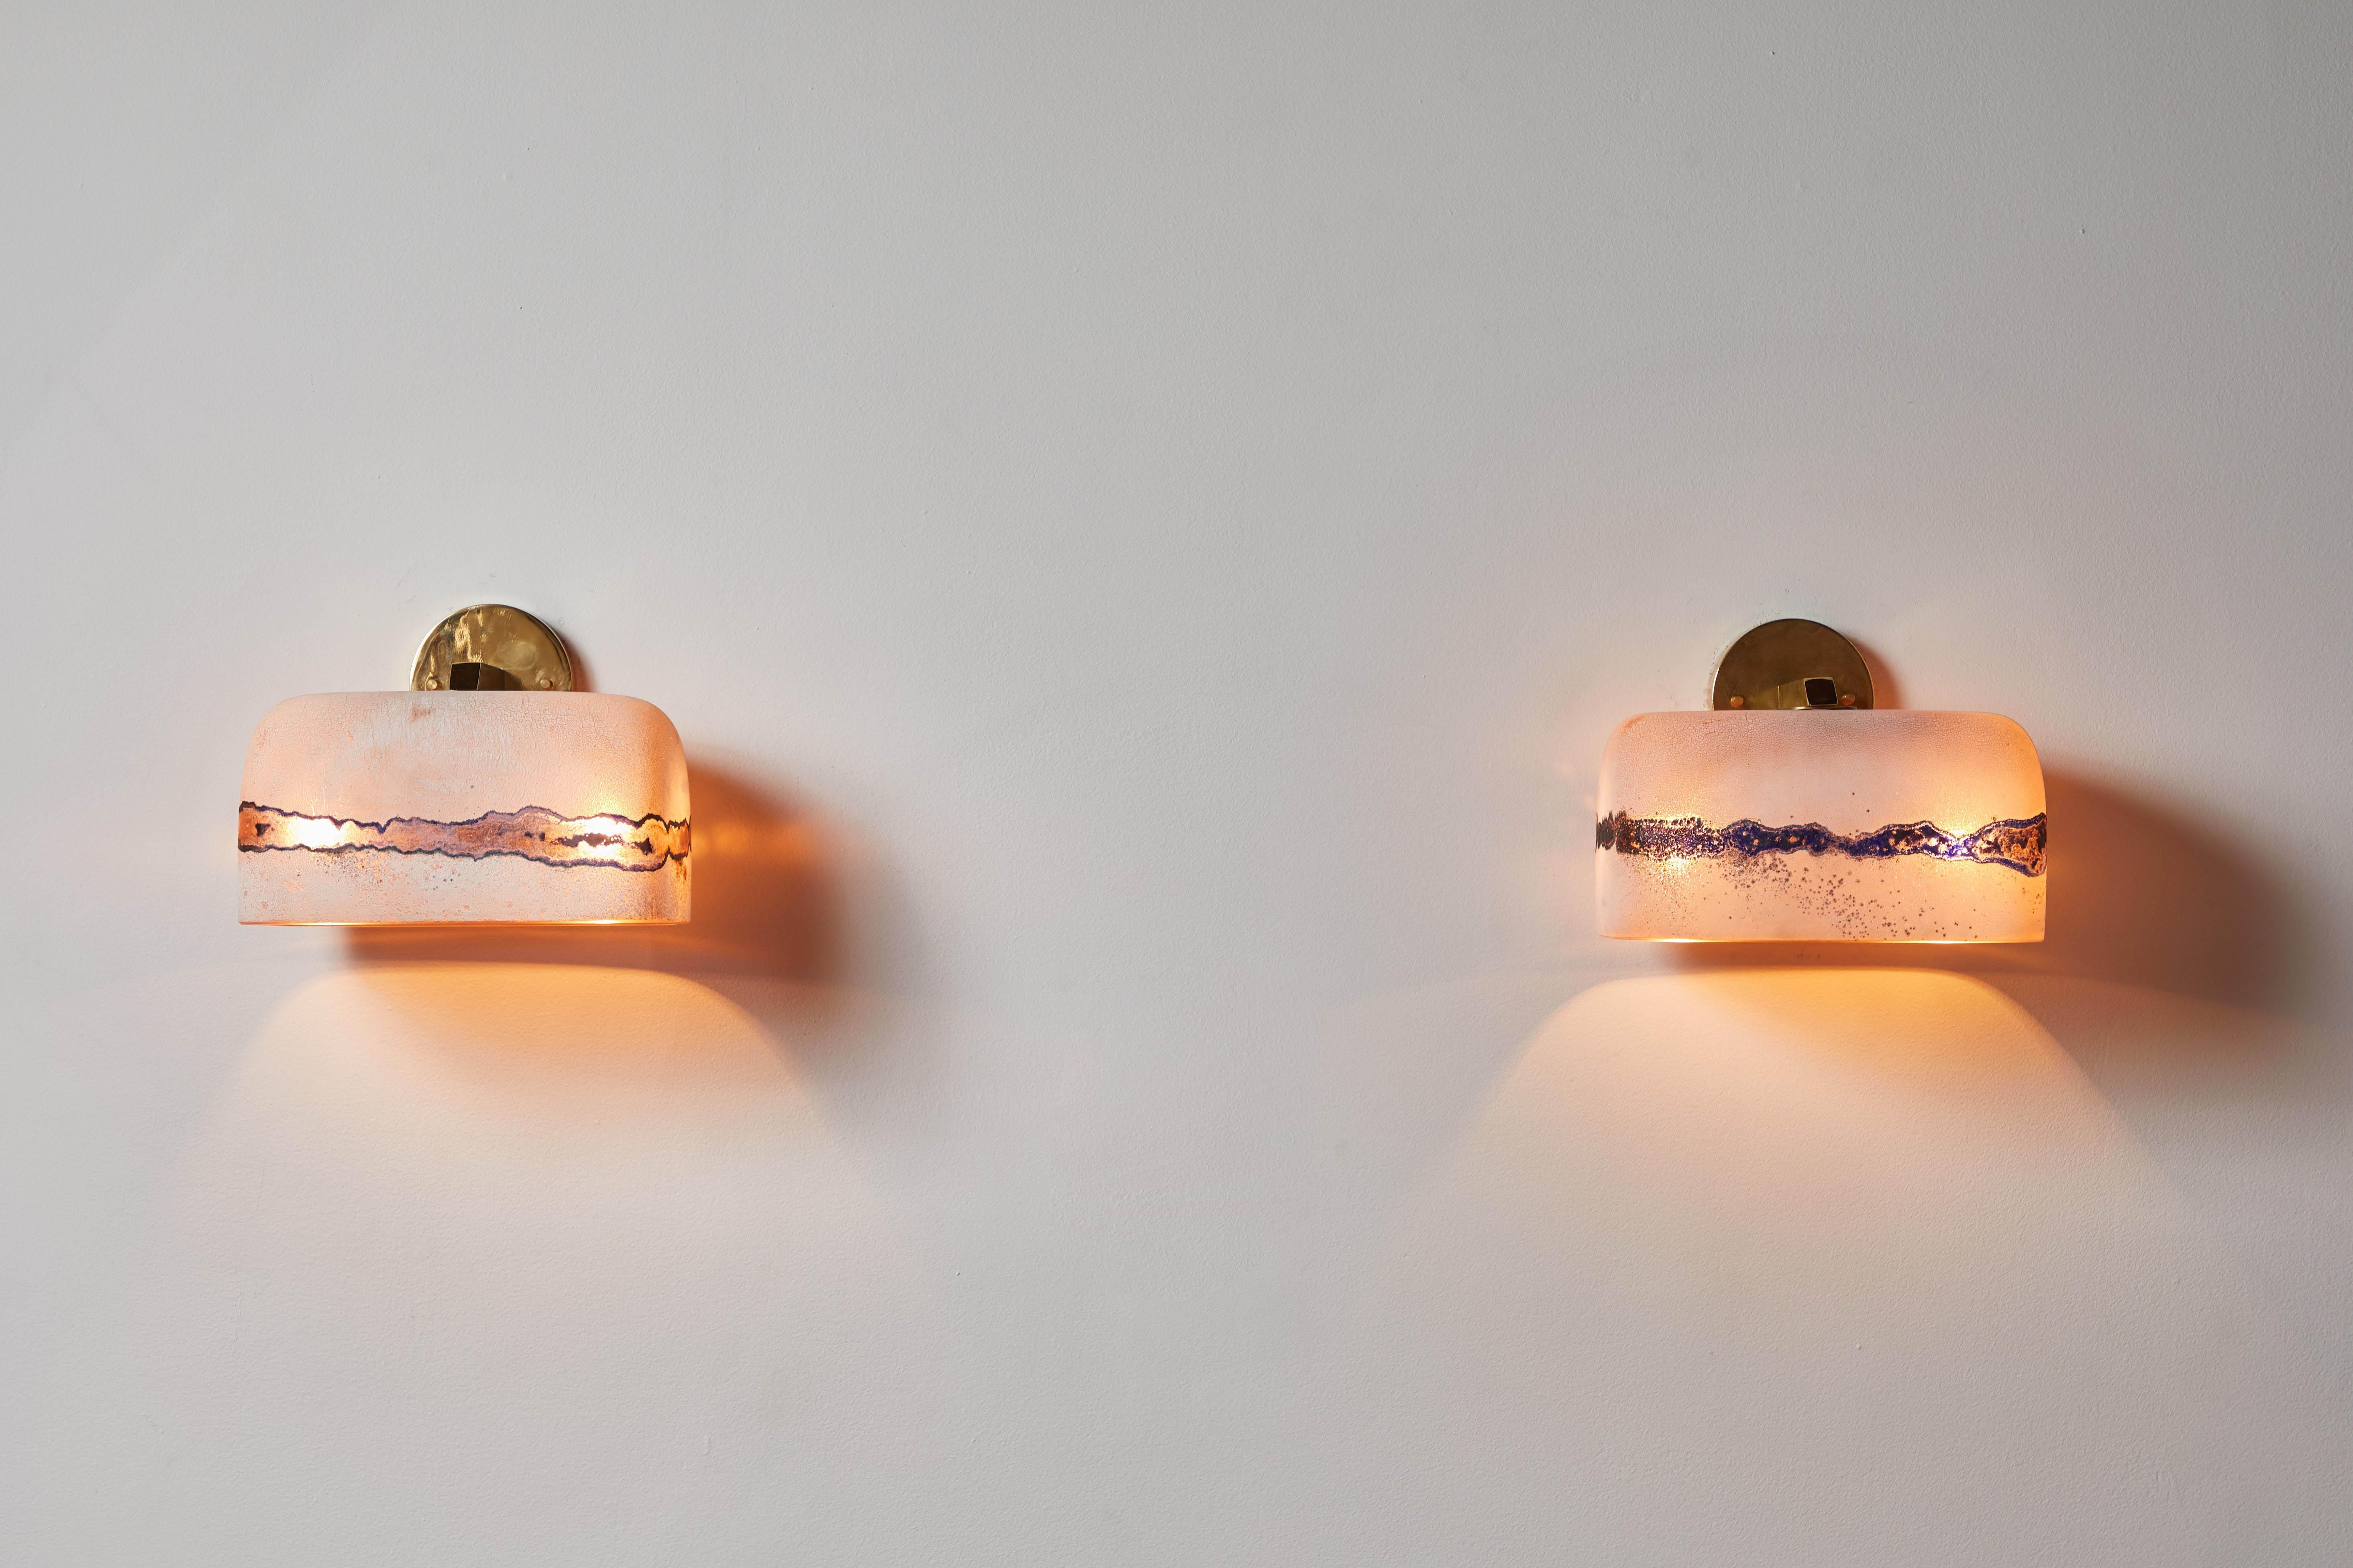 One sconce by Alfredo Barbini. Designed and manufactured in Italy, circa 1960's. Murano Scavo glass and brass. Rewired for U.S. standards. Each light takes one bulb E27 60w candelabra bulb. Bulbs provided as a onetime courtesy. Priced and sold